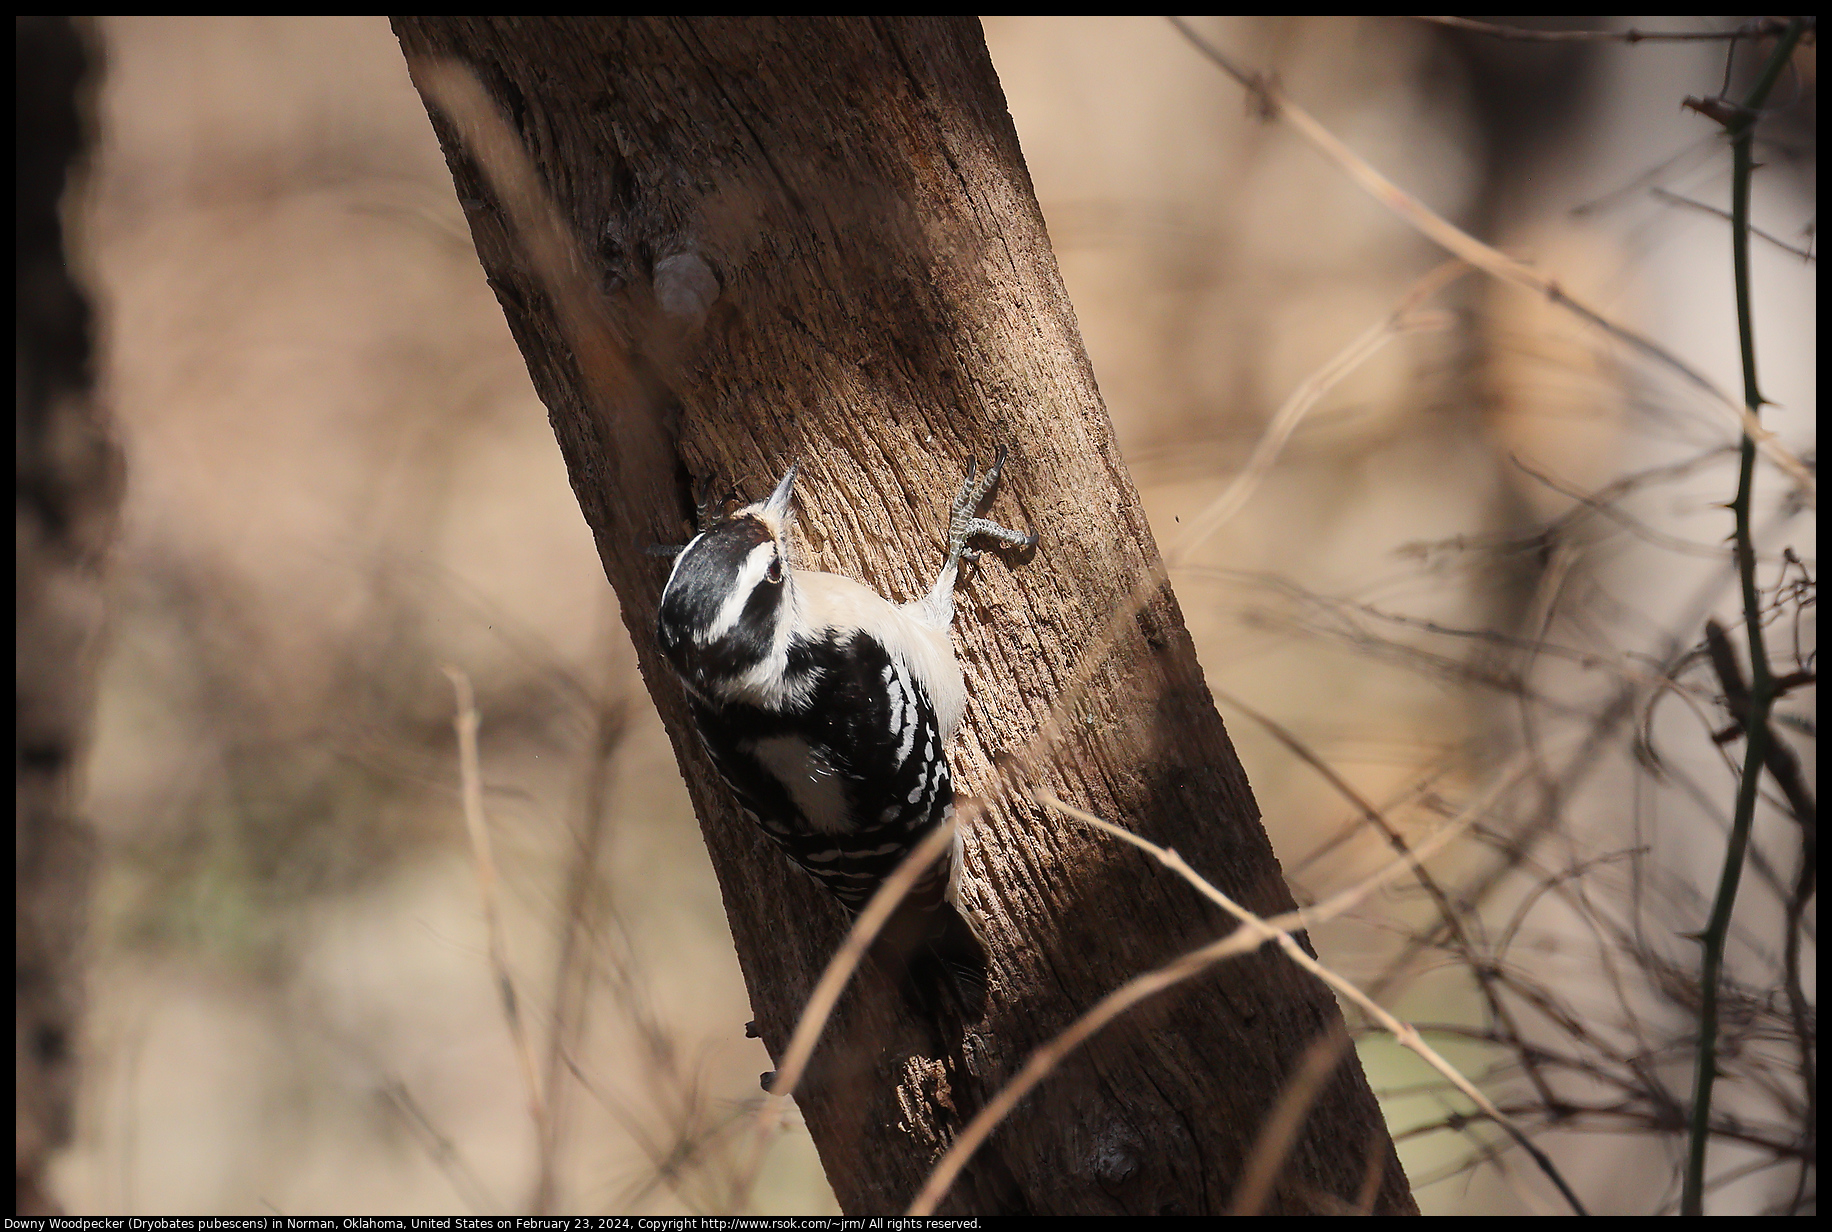 Downy Woodpecker (Dryobates pubescens) in Norman, Oklahoma, United States on February 23, 2024